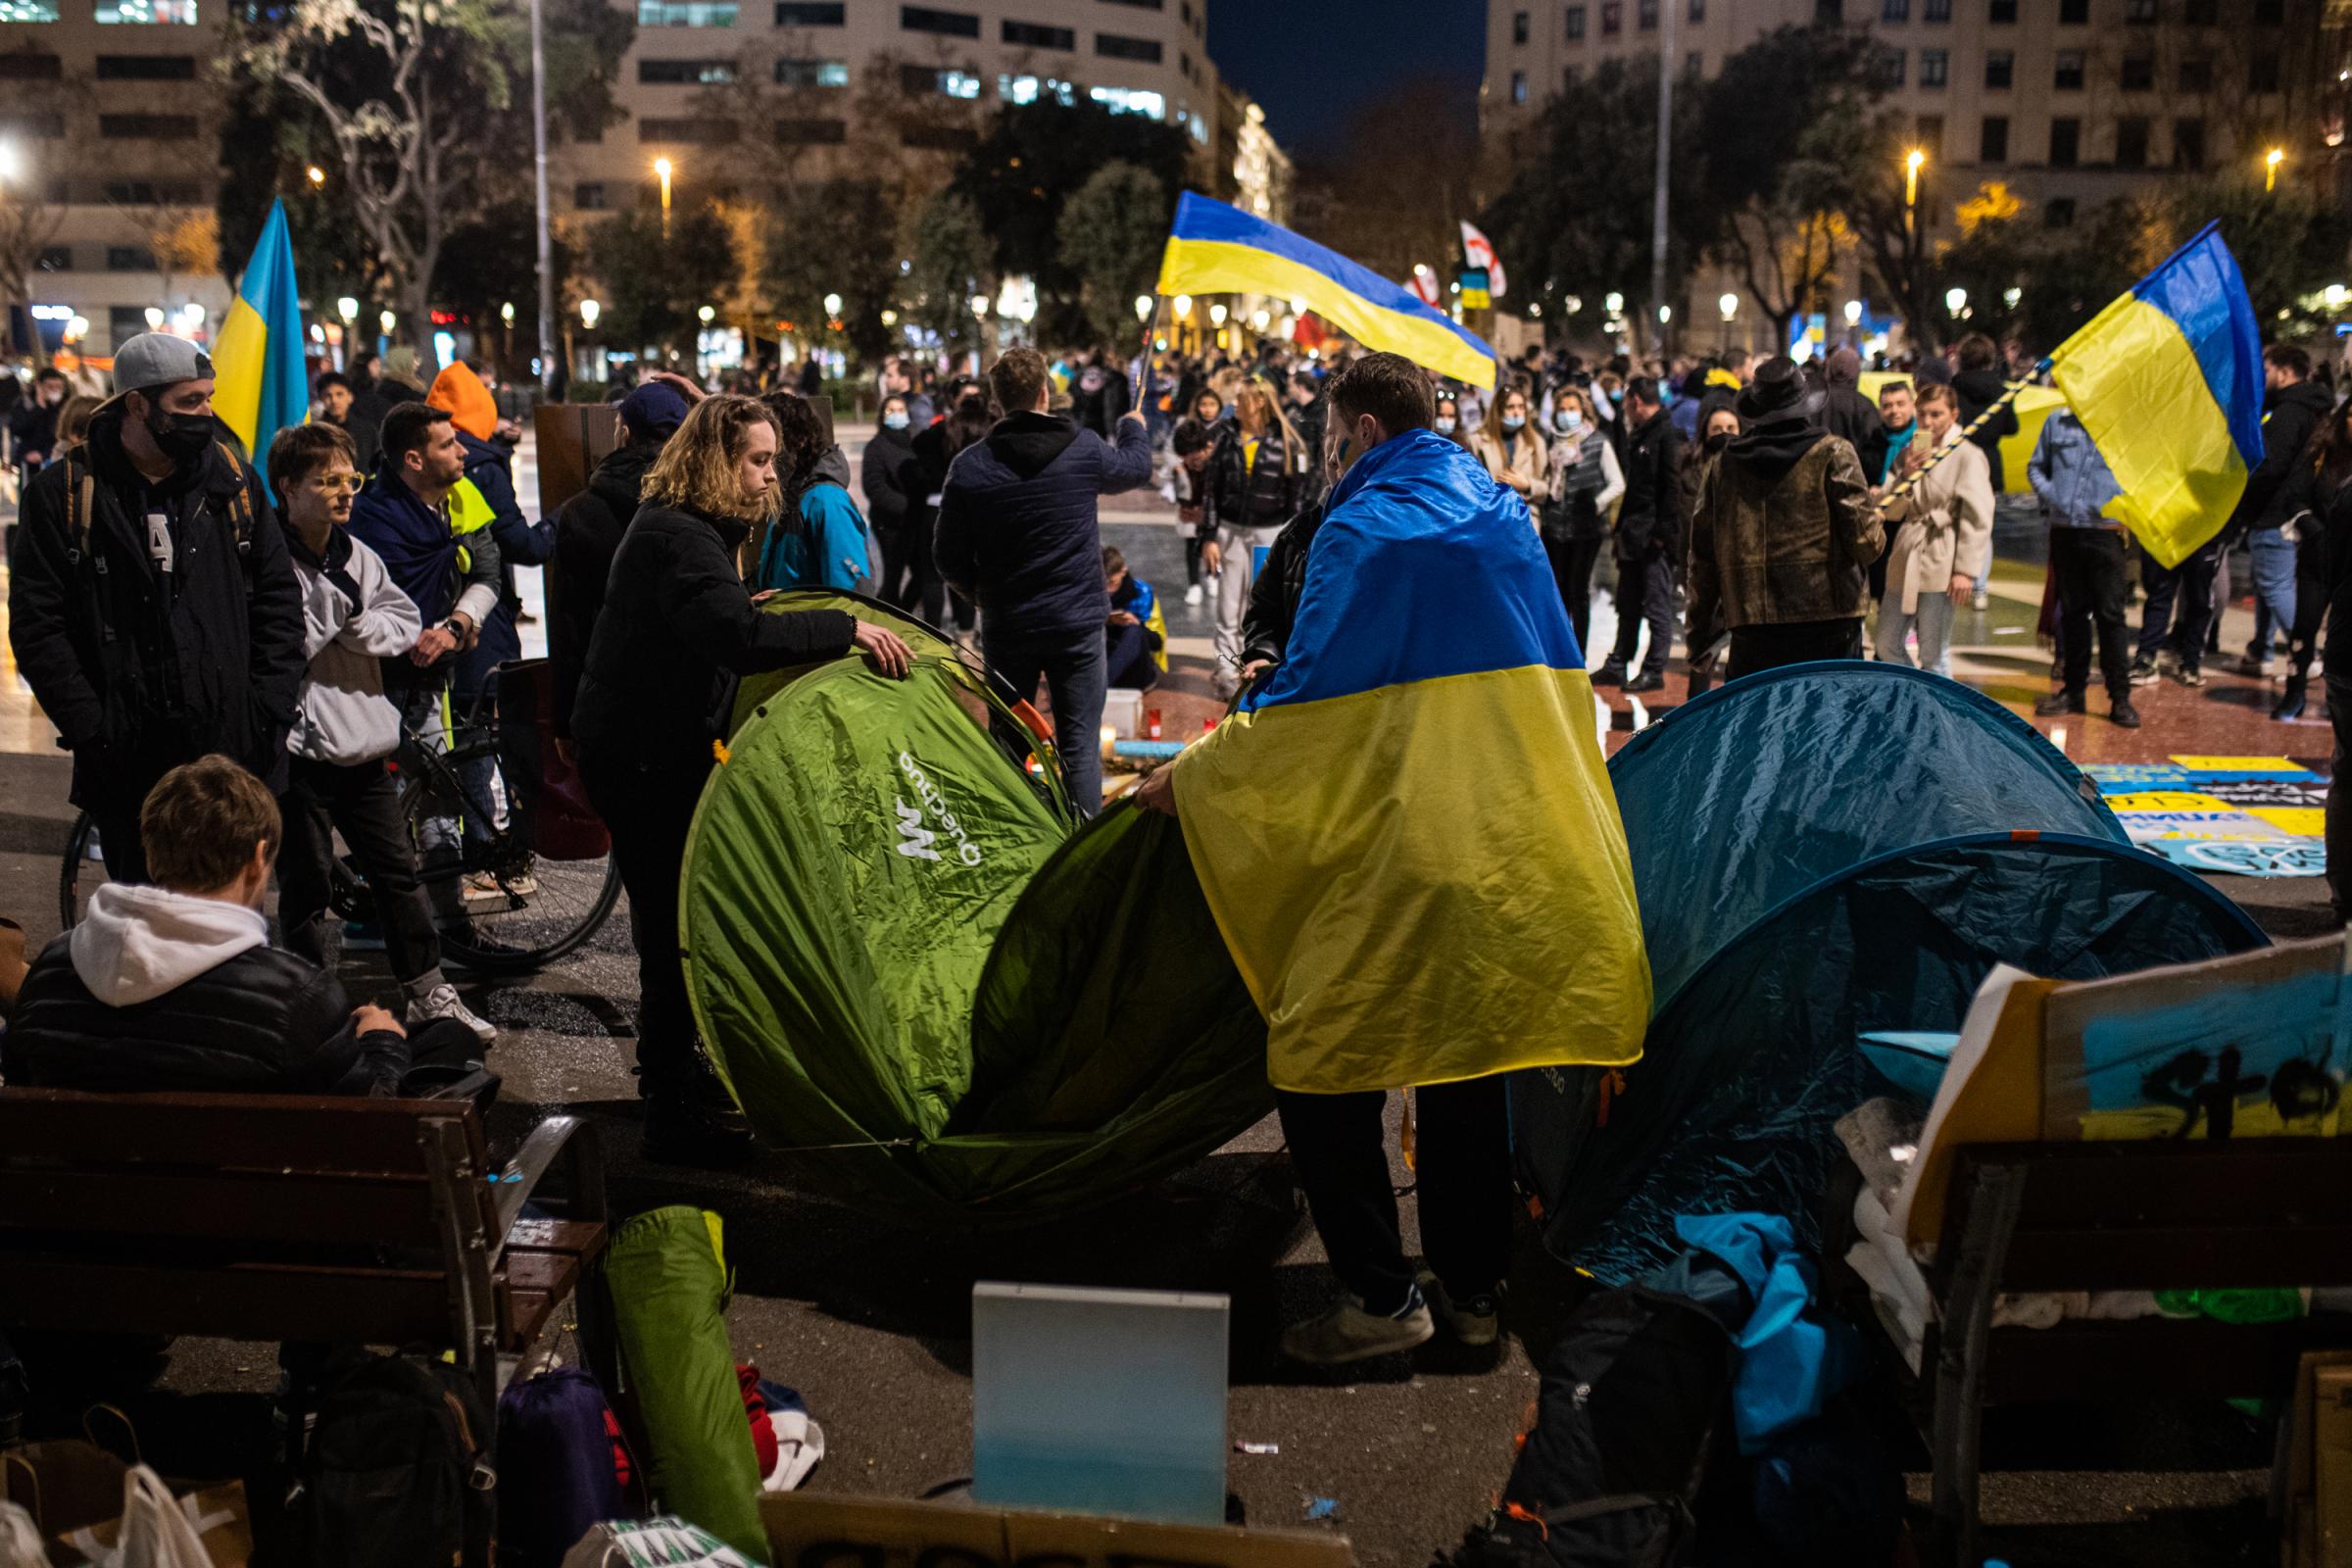 Protestors In Spain Rally For Ukraine After Russian Invasion - BARCELONA, SPAIN - FEBRUARY 27: Two activists are setting...